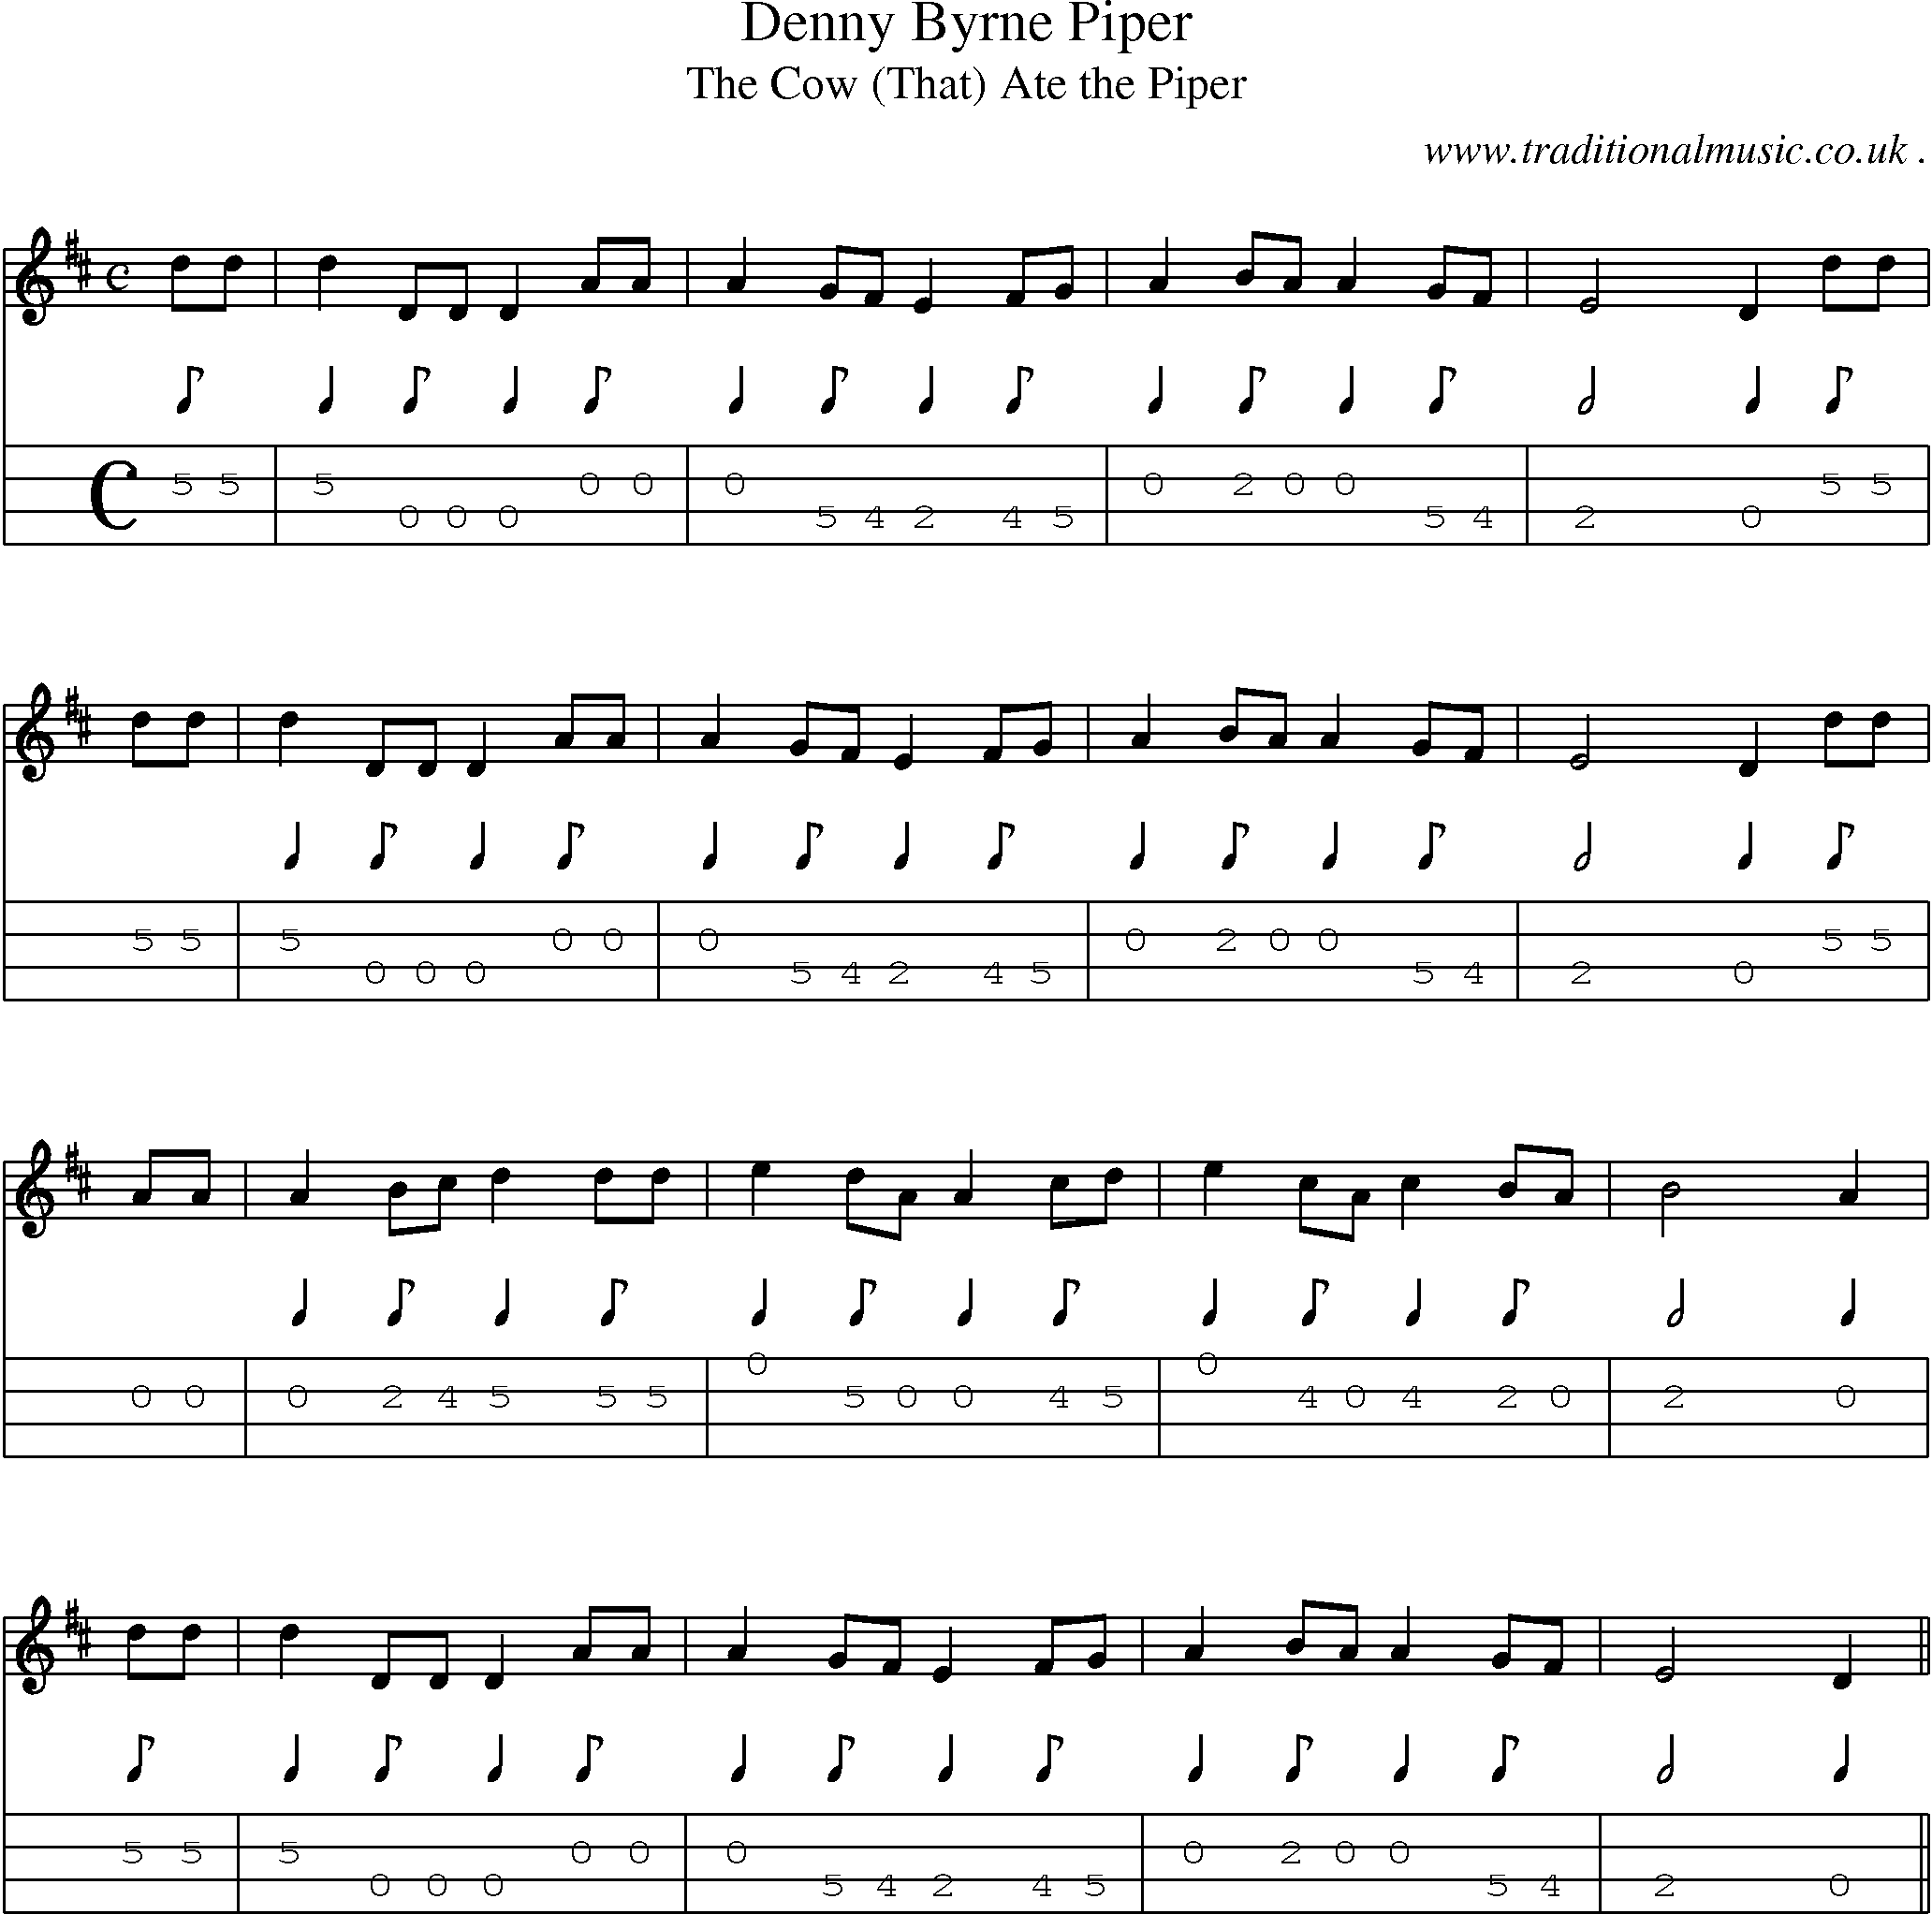 Sheet-Music and Mandolin Tabs for Denny Byrne Piper